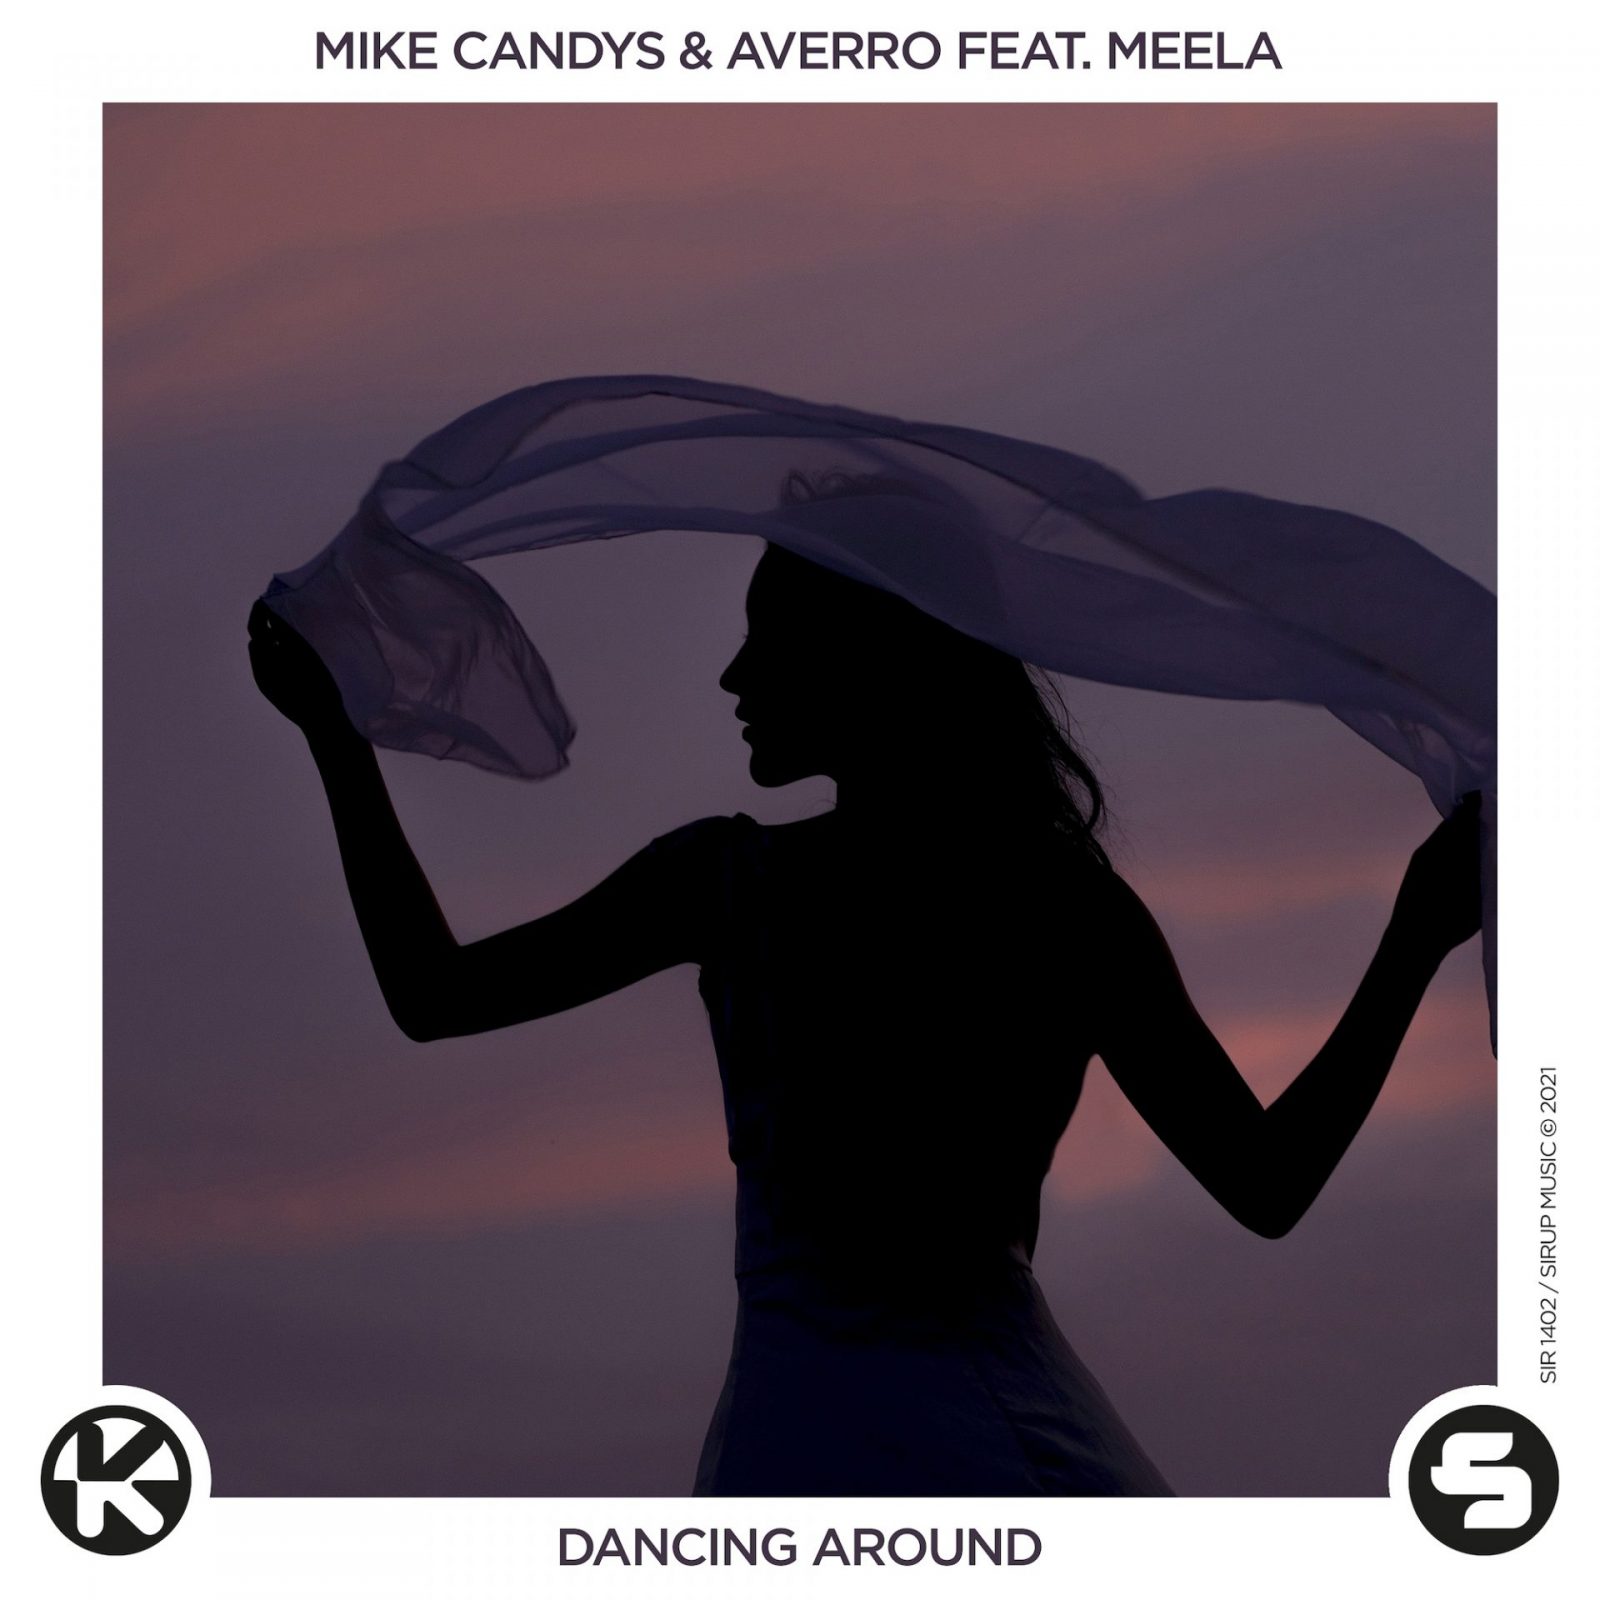 MIKE CANDYS & AVERRO FEAT. MEELA – DANCING AROUND